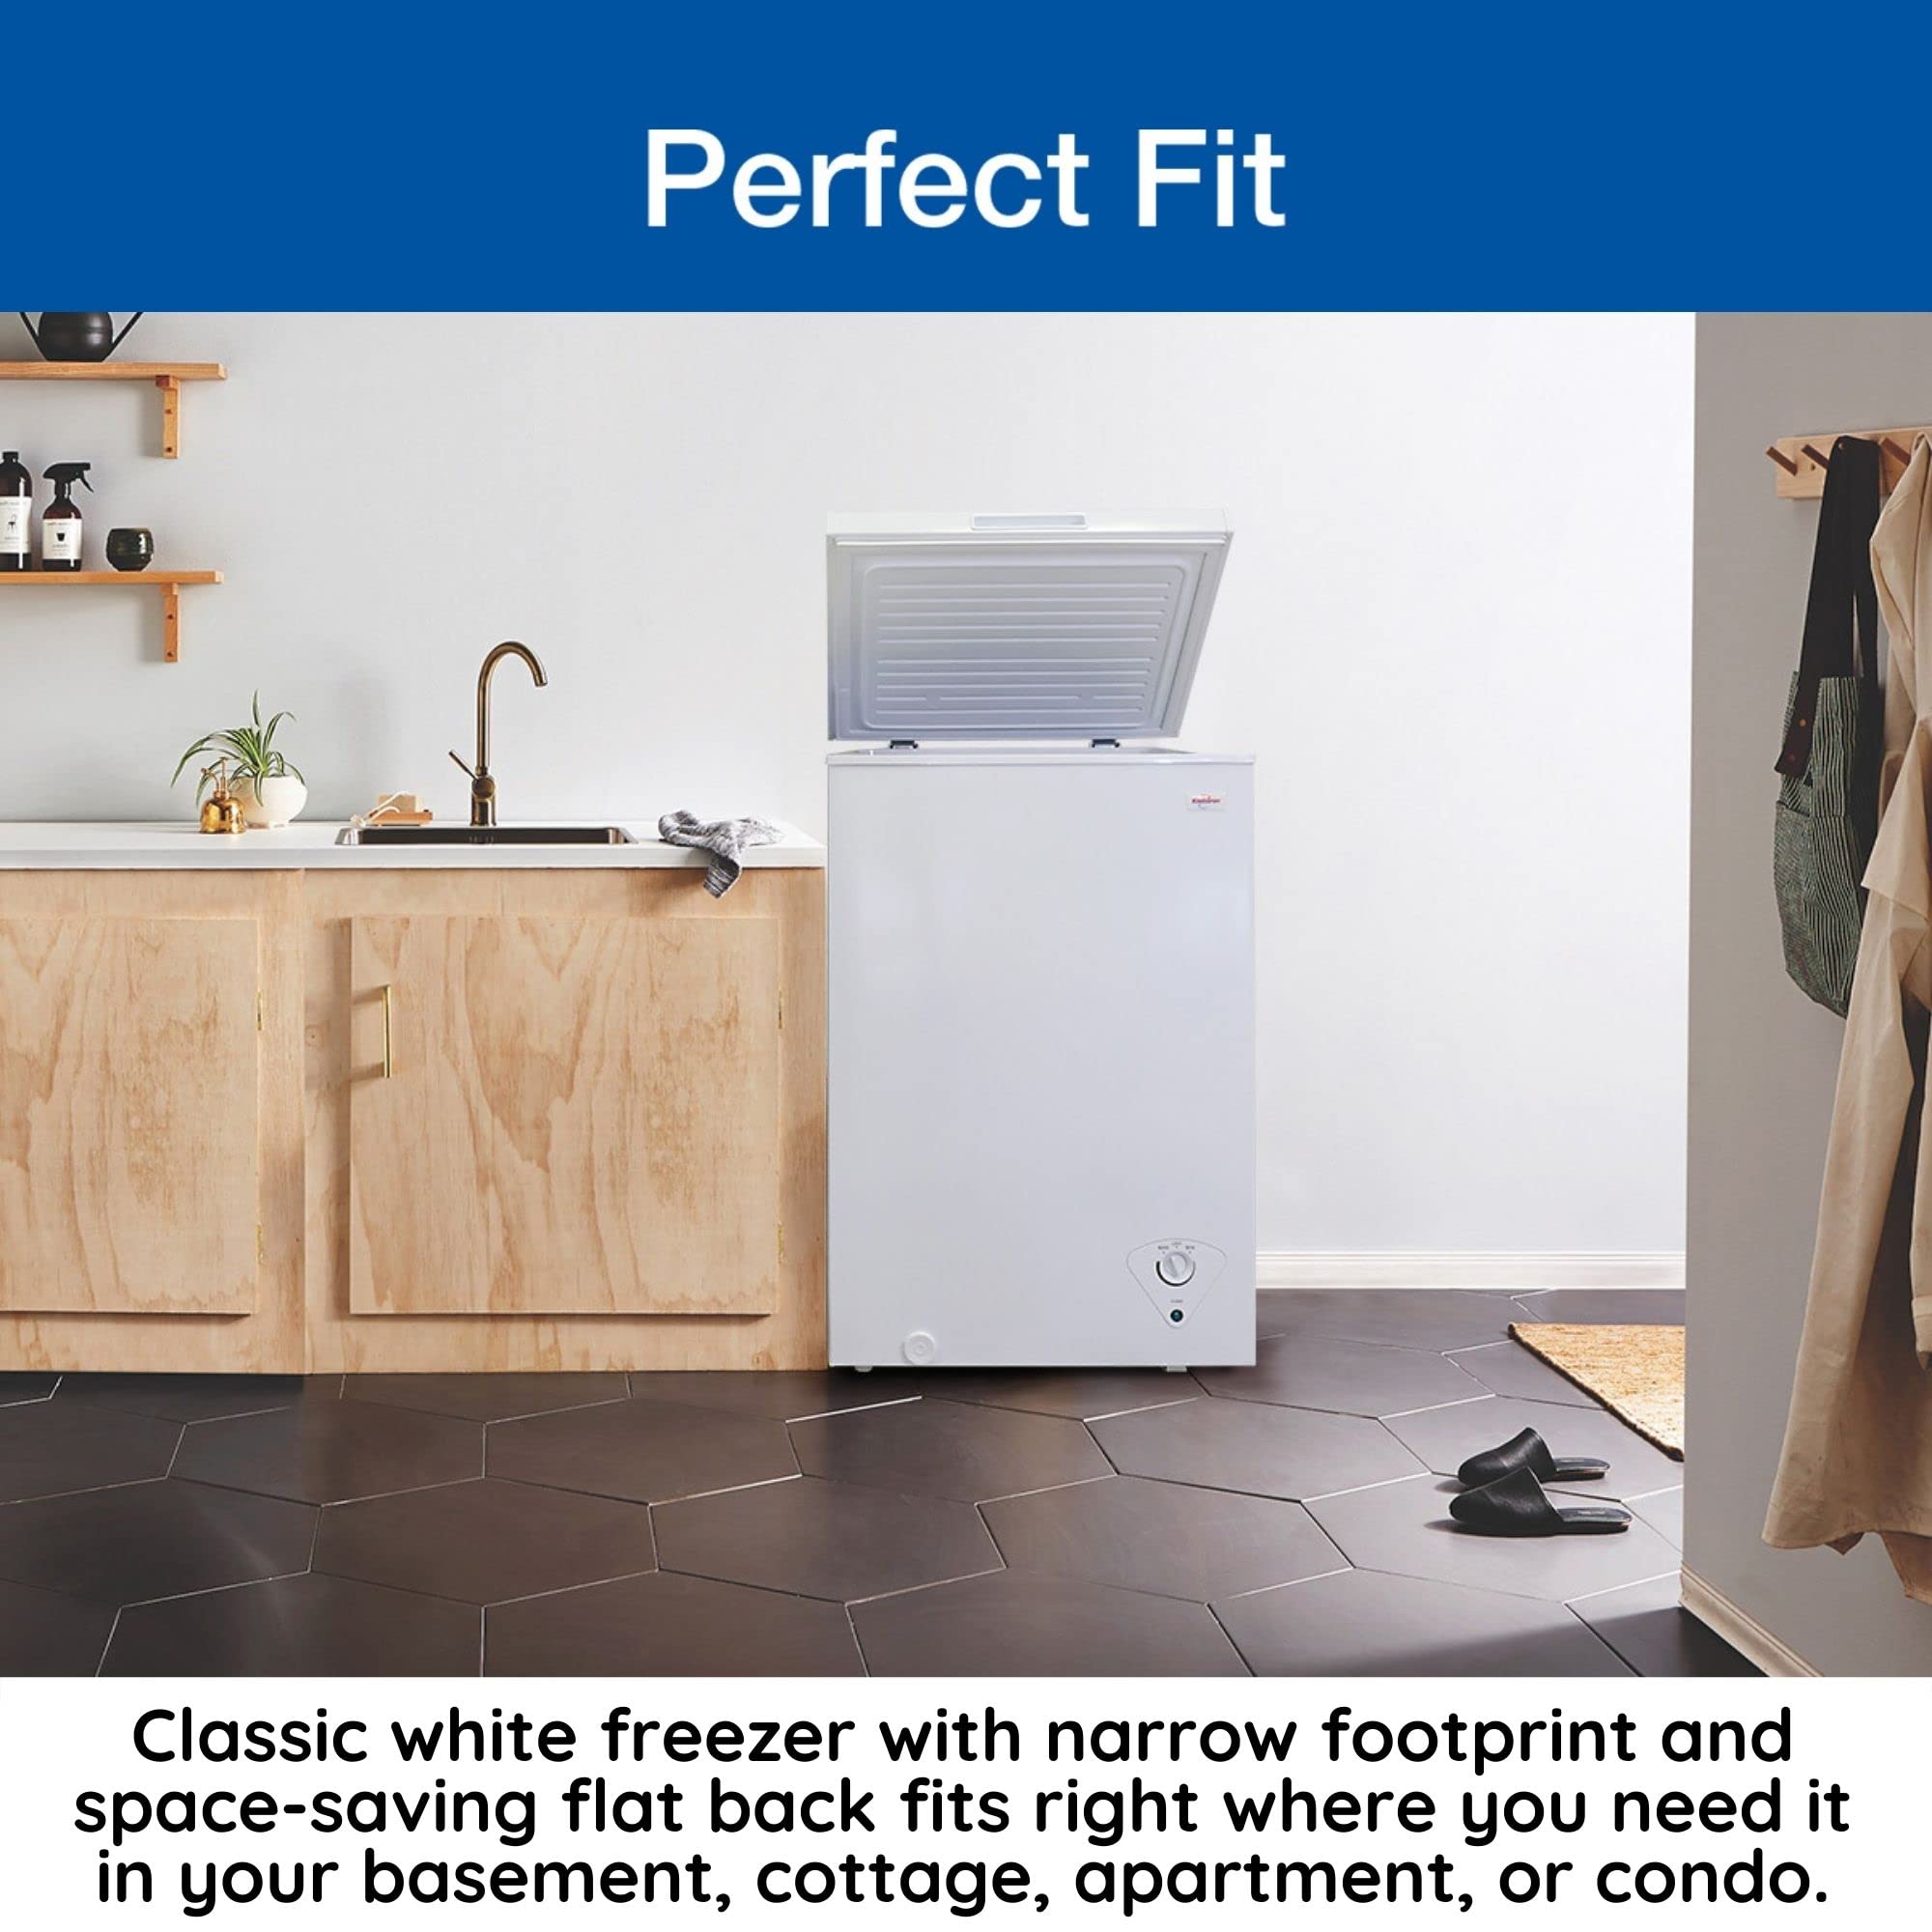 Koolatron Compact Chest Freezer, 3.5 cu ft (99L), White, Manual Defrost Deep Freeze, Storage Basket, Space-Saving Flat Back, Stay-Open Lid, Front-Access Defrost Drain, for Apartment, Condo, Cottage